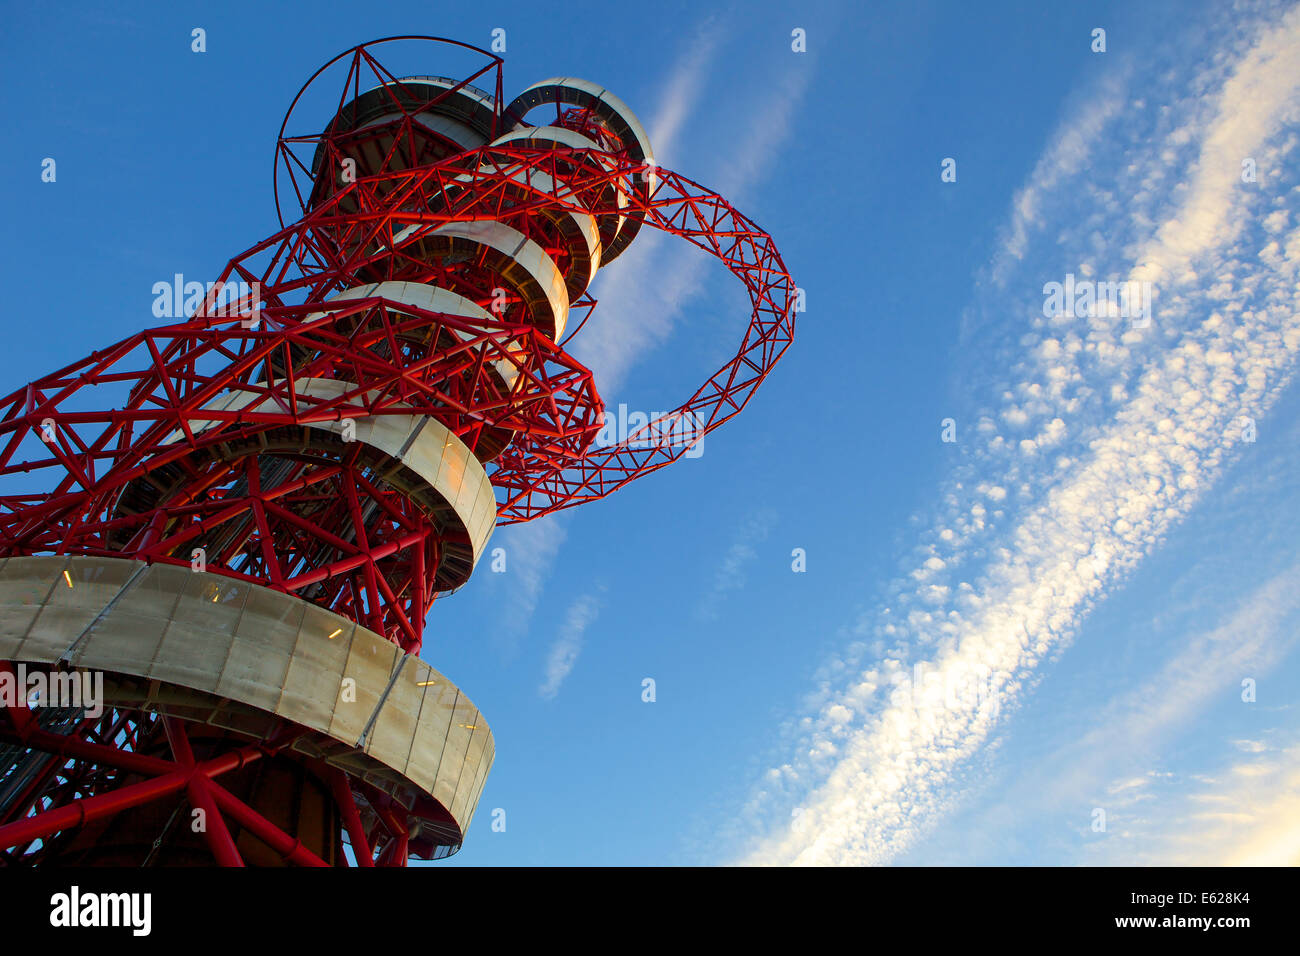 Orbit tower by Arcelor Mittal in the Queen Elizabeth Olympic park Stratford. Stock Photo